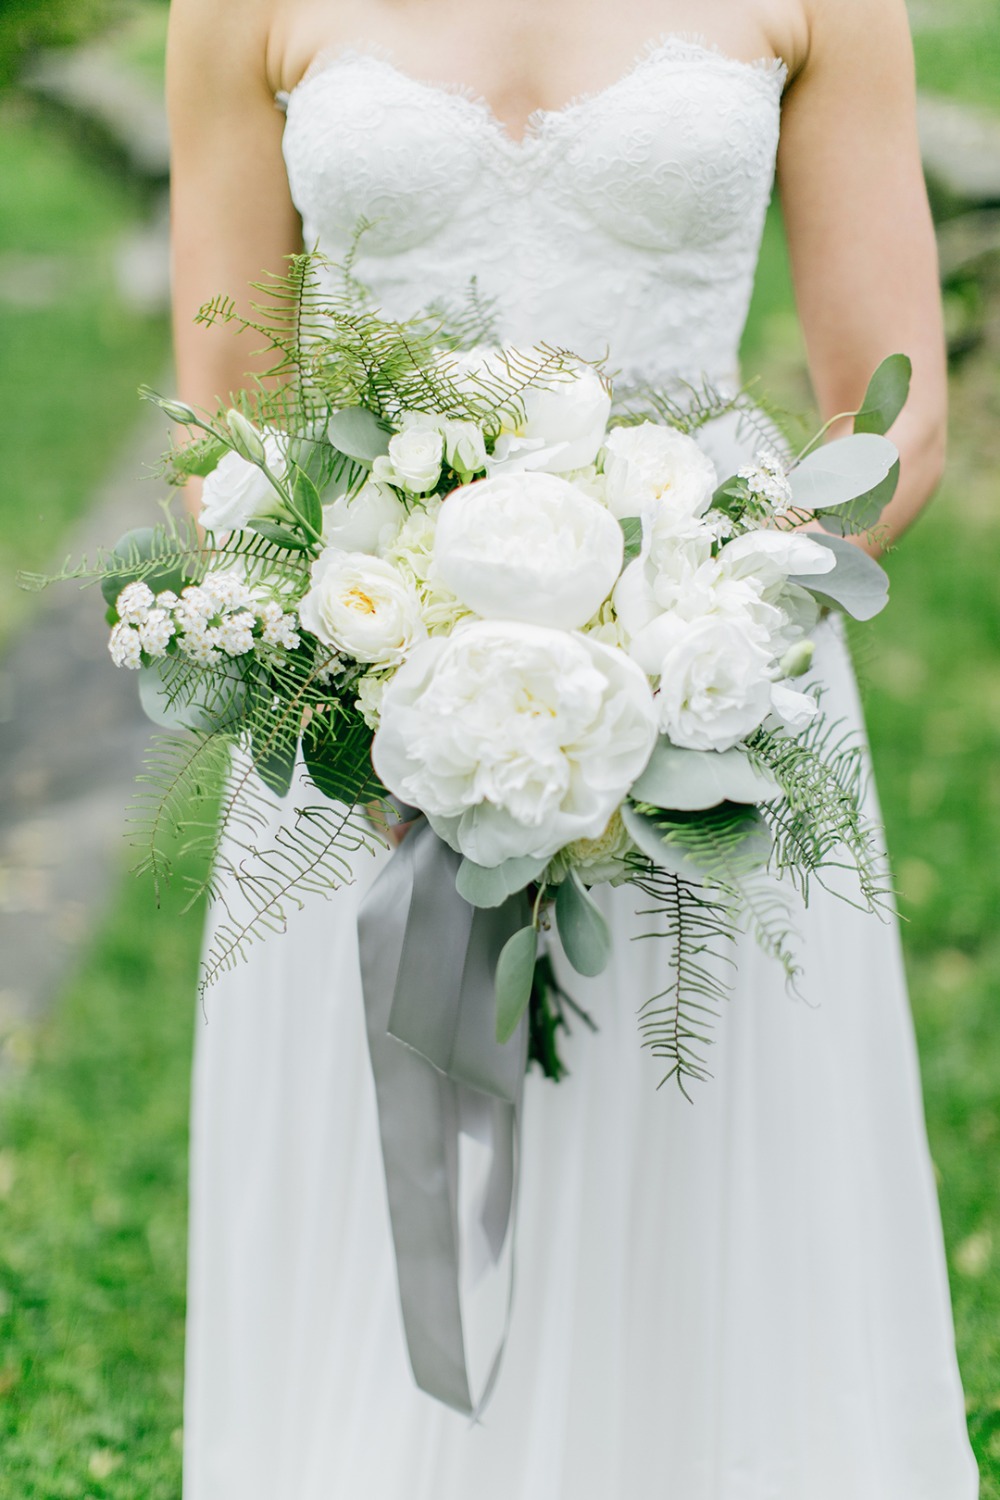 White and green wedding bouquet with gray ribbon